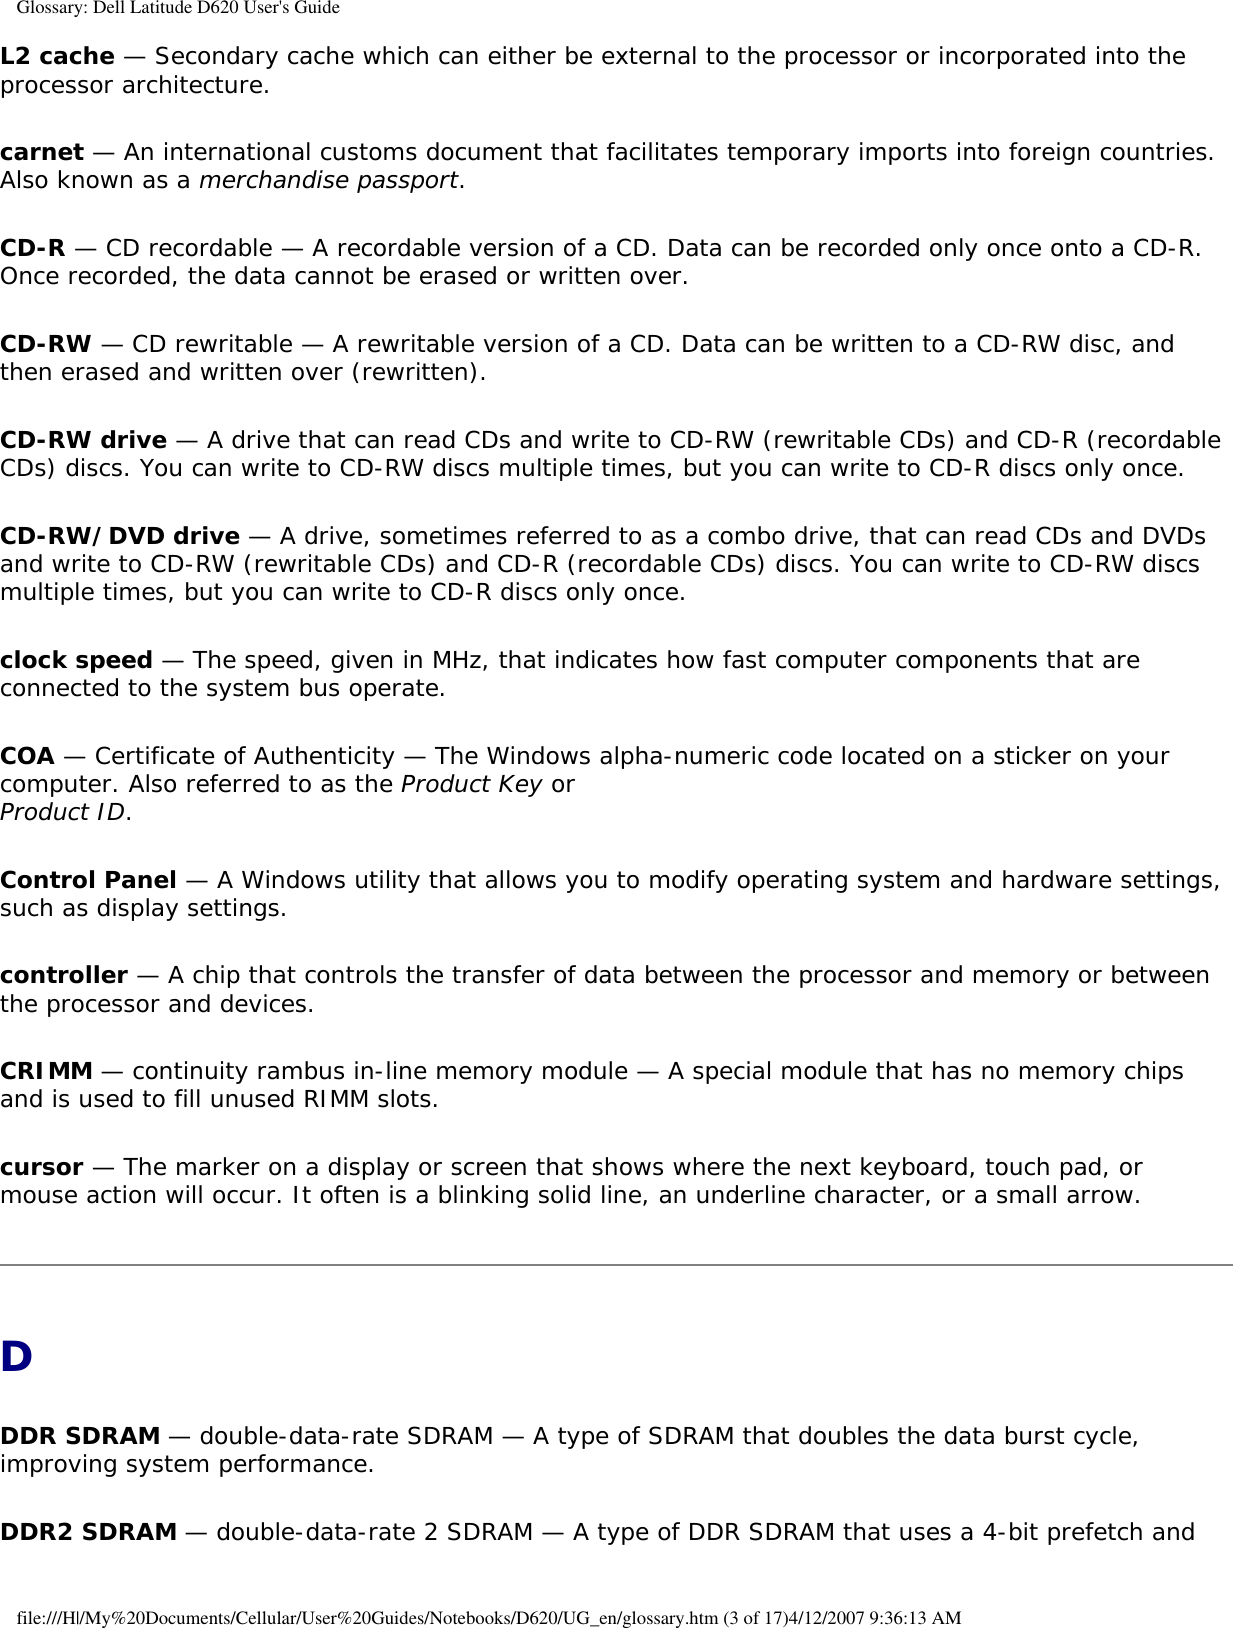 Glossary: Dell Latitude D620 User&apos;s GuideL2 cache — Secondary cache which can either be external to the processor or incorporated into the processor architecture.carnet — An international customs document that facilitates temporary imports into foreign countries. Also known as a merchandise passport.CD-R — CD recordable — A recordable version of a CD. Data can be recorded only once onto a CD-R. Once recorded, the data cannot be erased or written over.CD-RW — CD rewritable — A rewritable version of a CD. Data can be written to a CD-RW disc, and then erased and written over (rewritten).CD-RW drive — A drive that can read CDs and write to CD-RW (rewritable CDs) and CD-R (recordable CDs) discs. You can write to CD-RW discs multiple times, but you can write to CD-R discs only once.CD-RW/DVD drive — A drive, sometimes referred to as a combo drive, that can read CDs and DVDs and write to CD-RW (rewritable CDs) and CD-R (recordable CDs) discs. You can write to CD-RW discs multiple times, but you can write to CD-R discs only once.clock speed — The speed, given in MHz, that indicates how fast computer components that are connected to the system bus operate. COA — Certificate of Authenticity — The Windows alpha-numeric code located on a sticker on your computer. Also referred to as the Product Key or Product ID.Control Panel — A Windows utility that allows you to modify operating system and hardware settings, such as display settings.controller — A chip that controls the transfer of data between the processor and memory or between the processor and devices.CRIMM — continuity rambus in-line memory module — A special module that has no memory chips and is used to fill unused RIMM slots.cursor — The marker on a display or screen that shows where the next keyboard, touch pad, or mouse action will occur. It often is a blinking solid line, an underline character, or a small arrow.DDDR SDRAM — double-data-rate SDRAM — A type of SDRAM that doubles the data burst cycle, improving system performance.DDR2 SDRAM — double-data-rate 2 SDRAM — A type of DDR SDRAM that uses a 4-bit prefetch and file:///H|/My%20Documents/Cellular/User%20Guides/Notebooks/D620/UG_en/glossary.htm (3 of 17)4/12/2007 9:36:13 AM